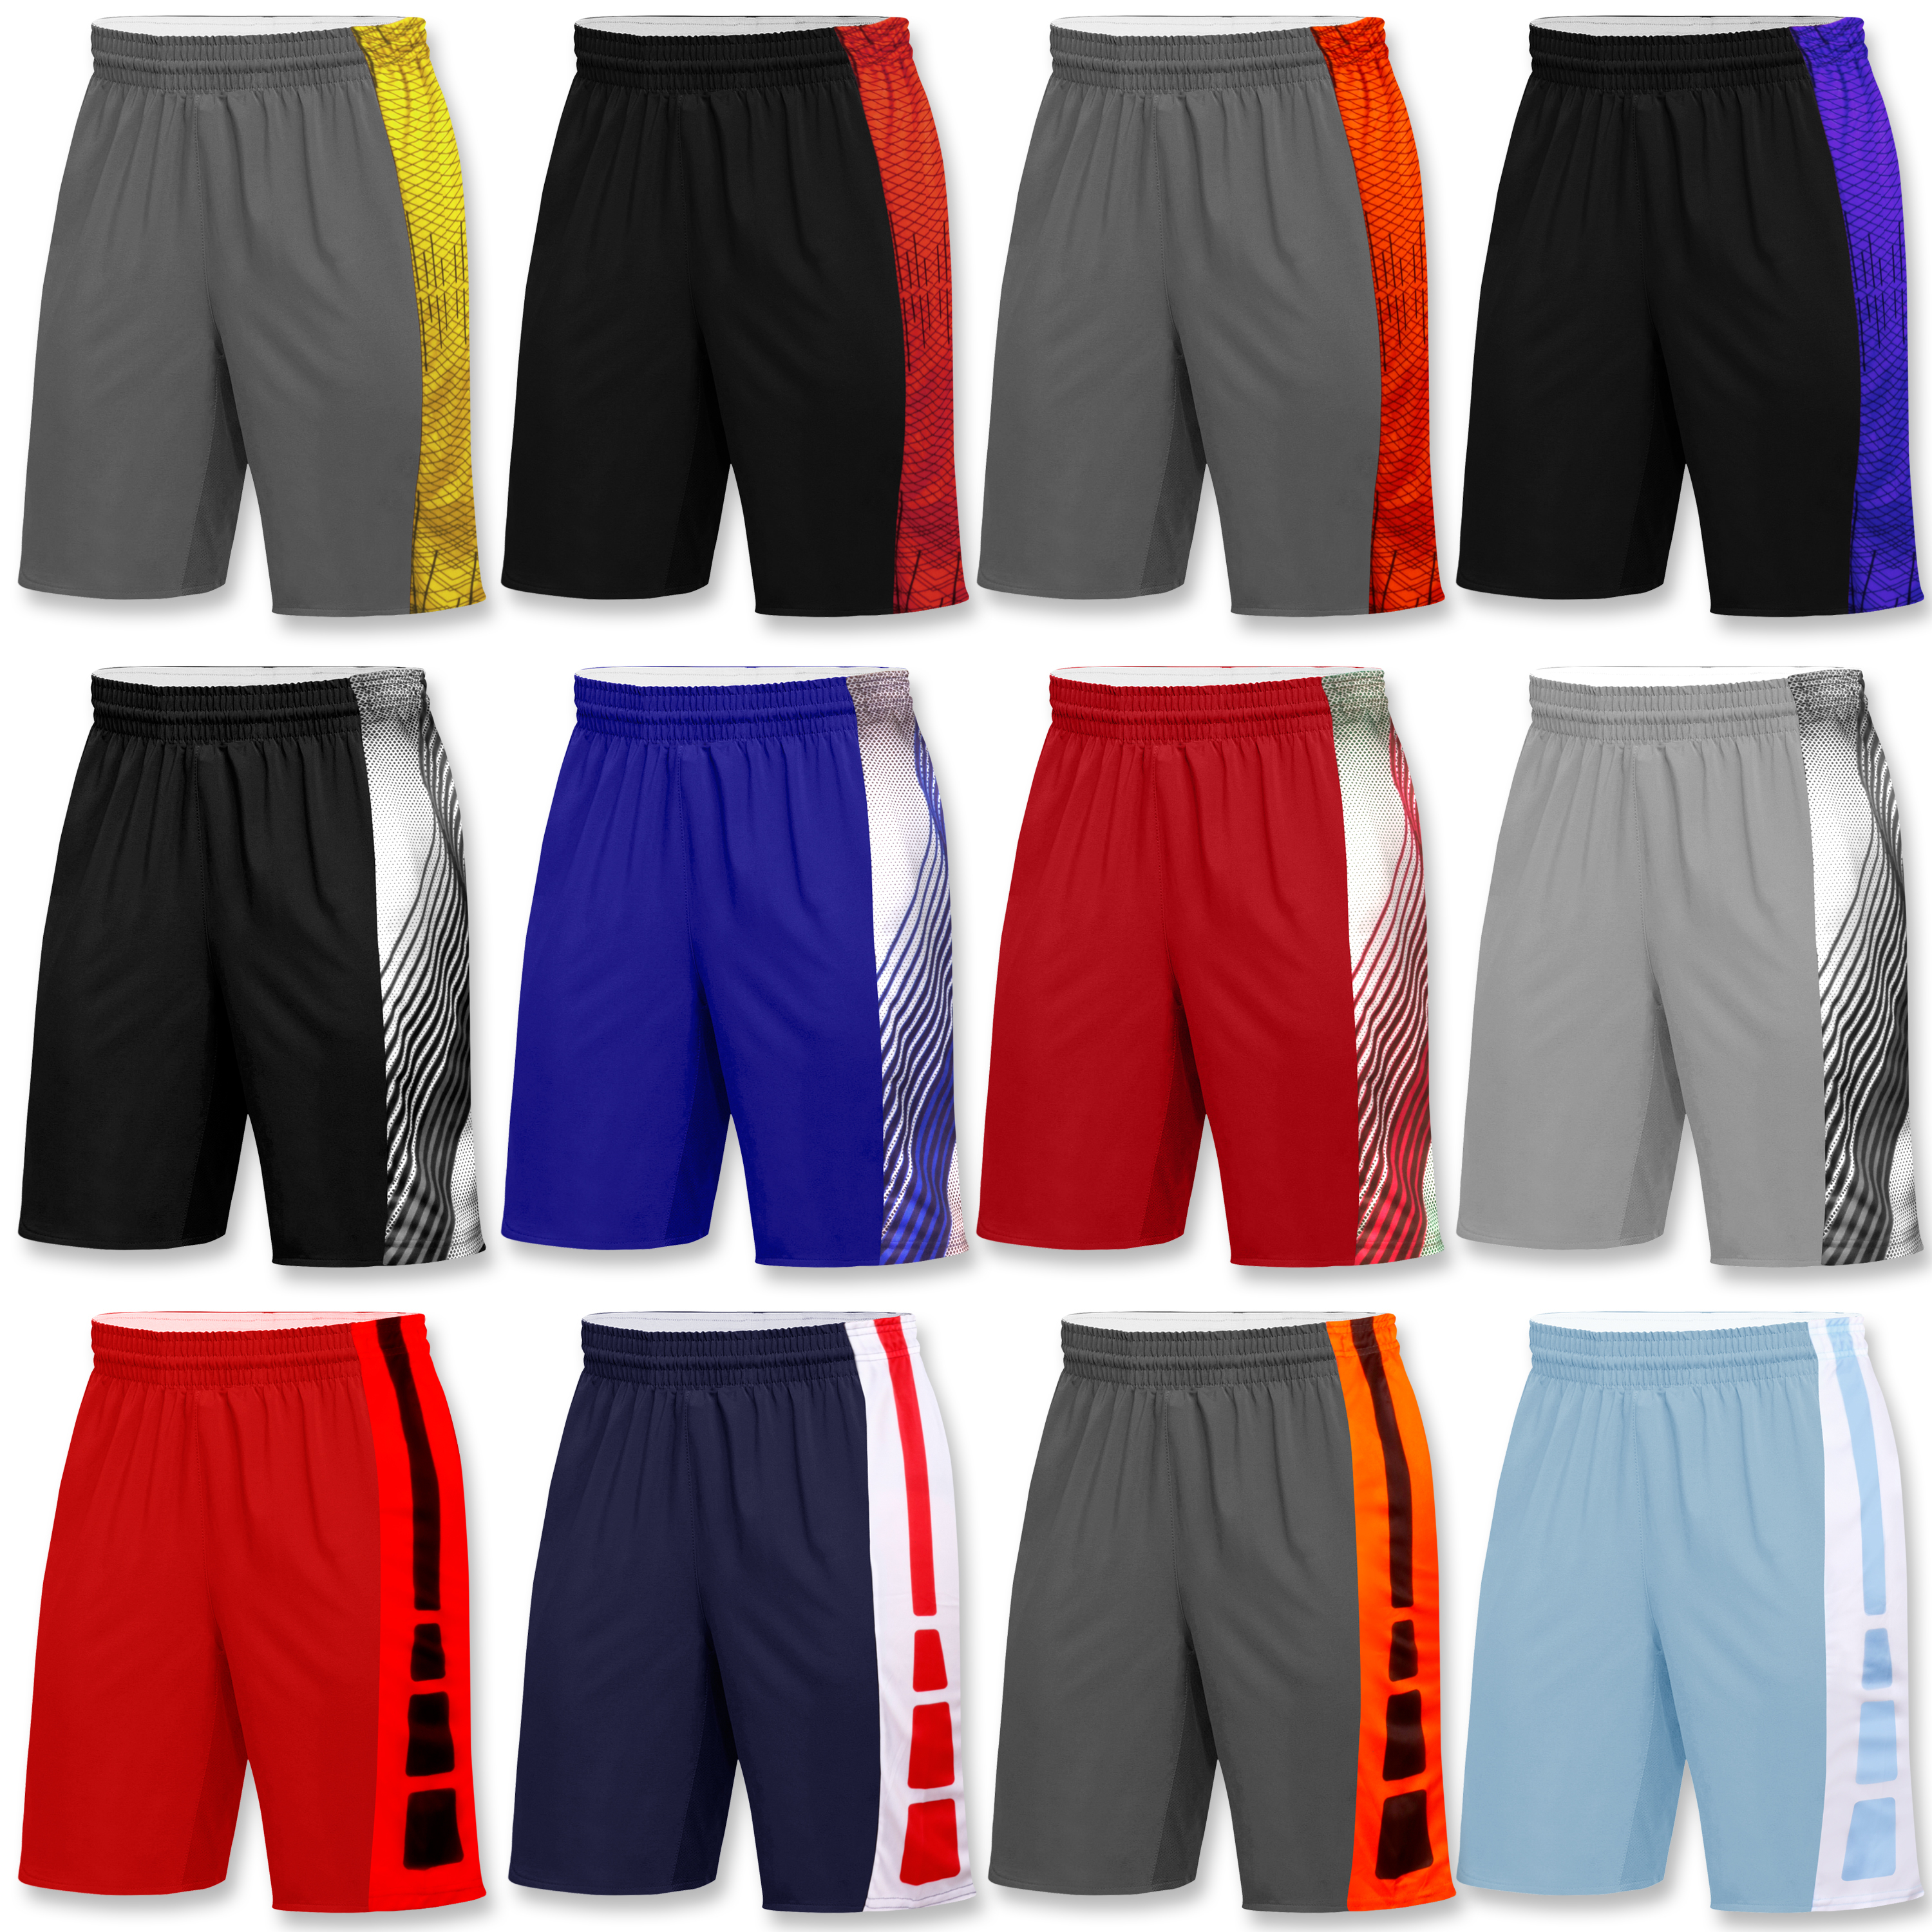 5-Pack Mystery Deal: Men's Active Athletic Performance Shorts - X-Large